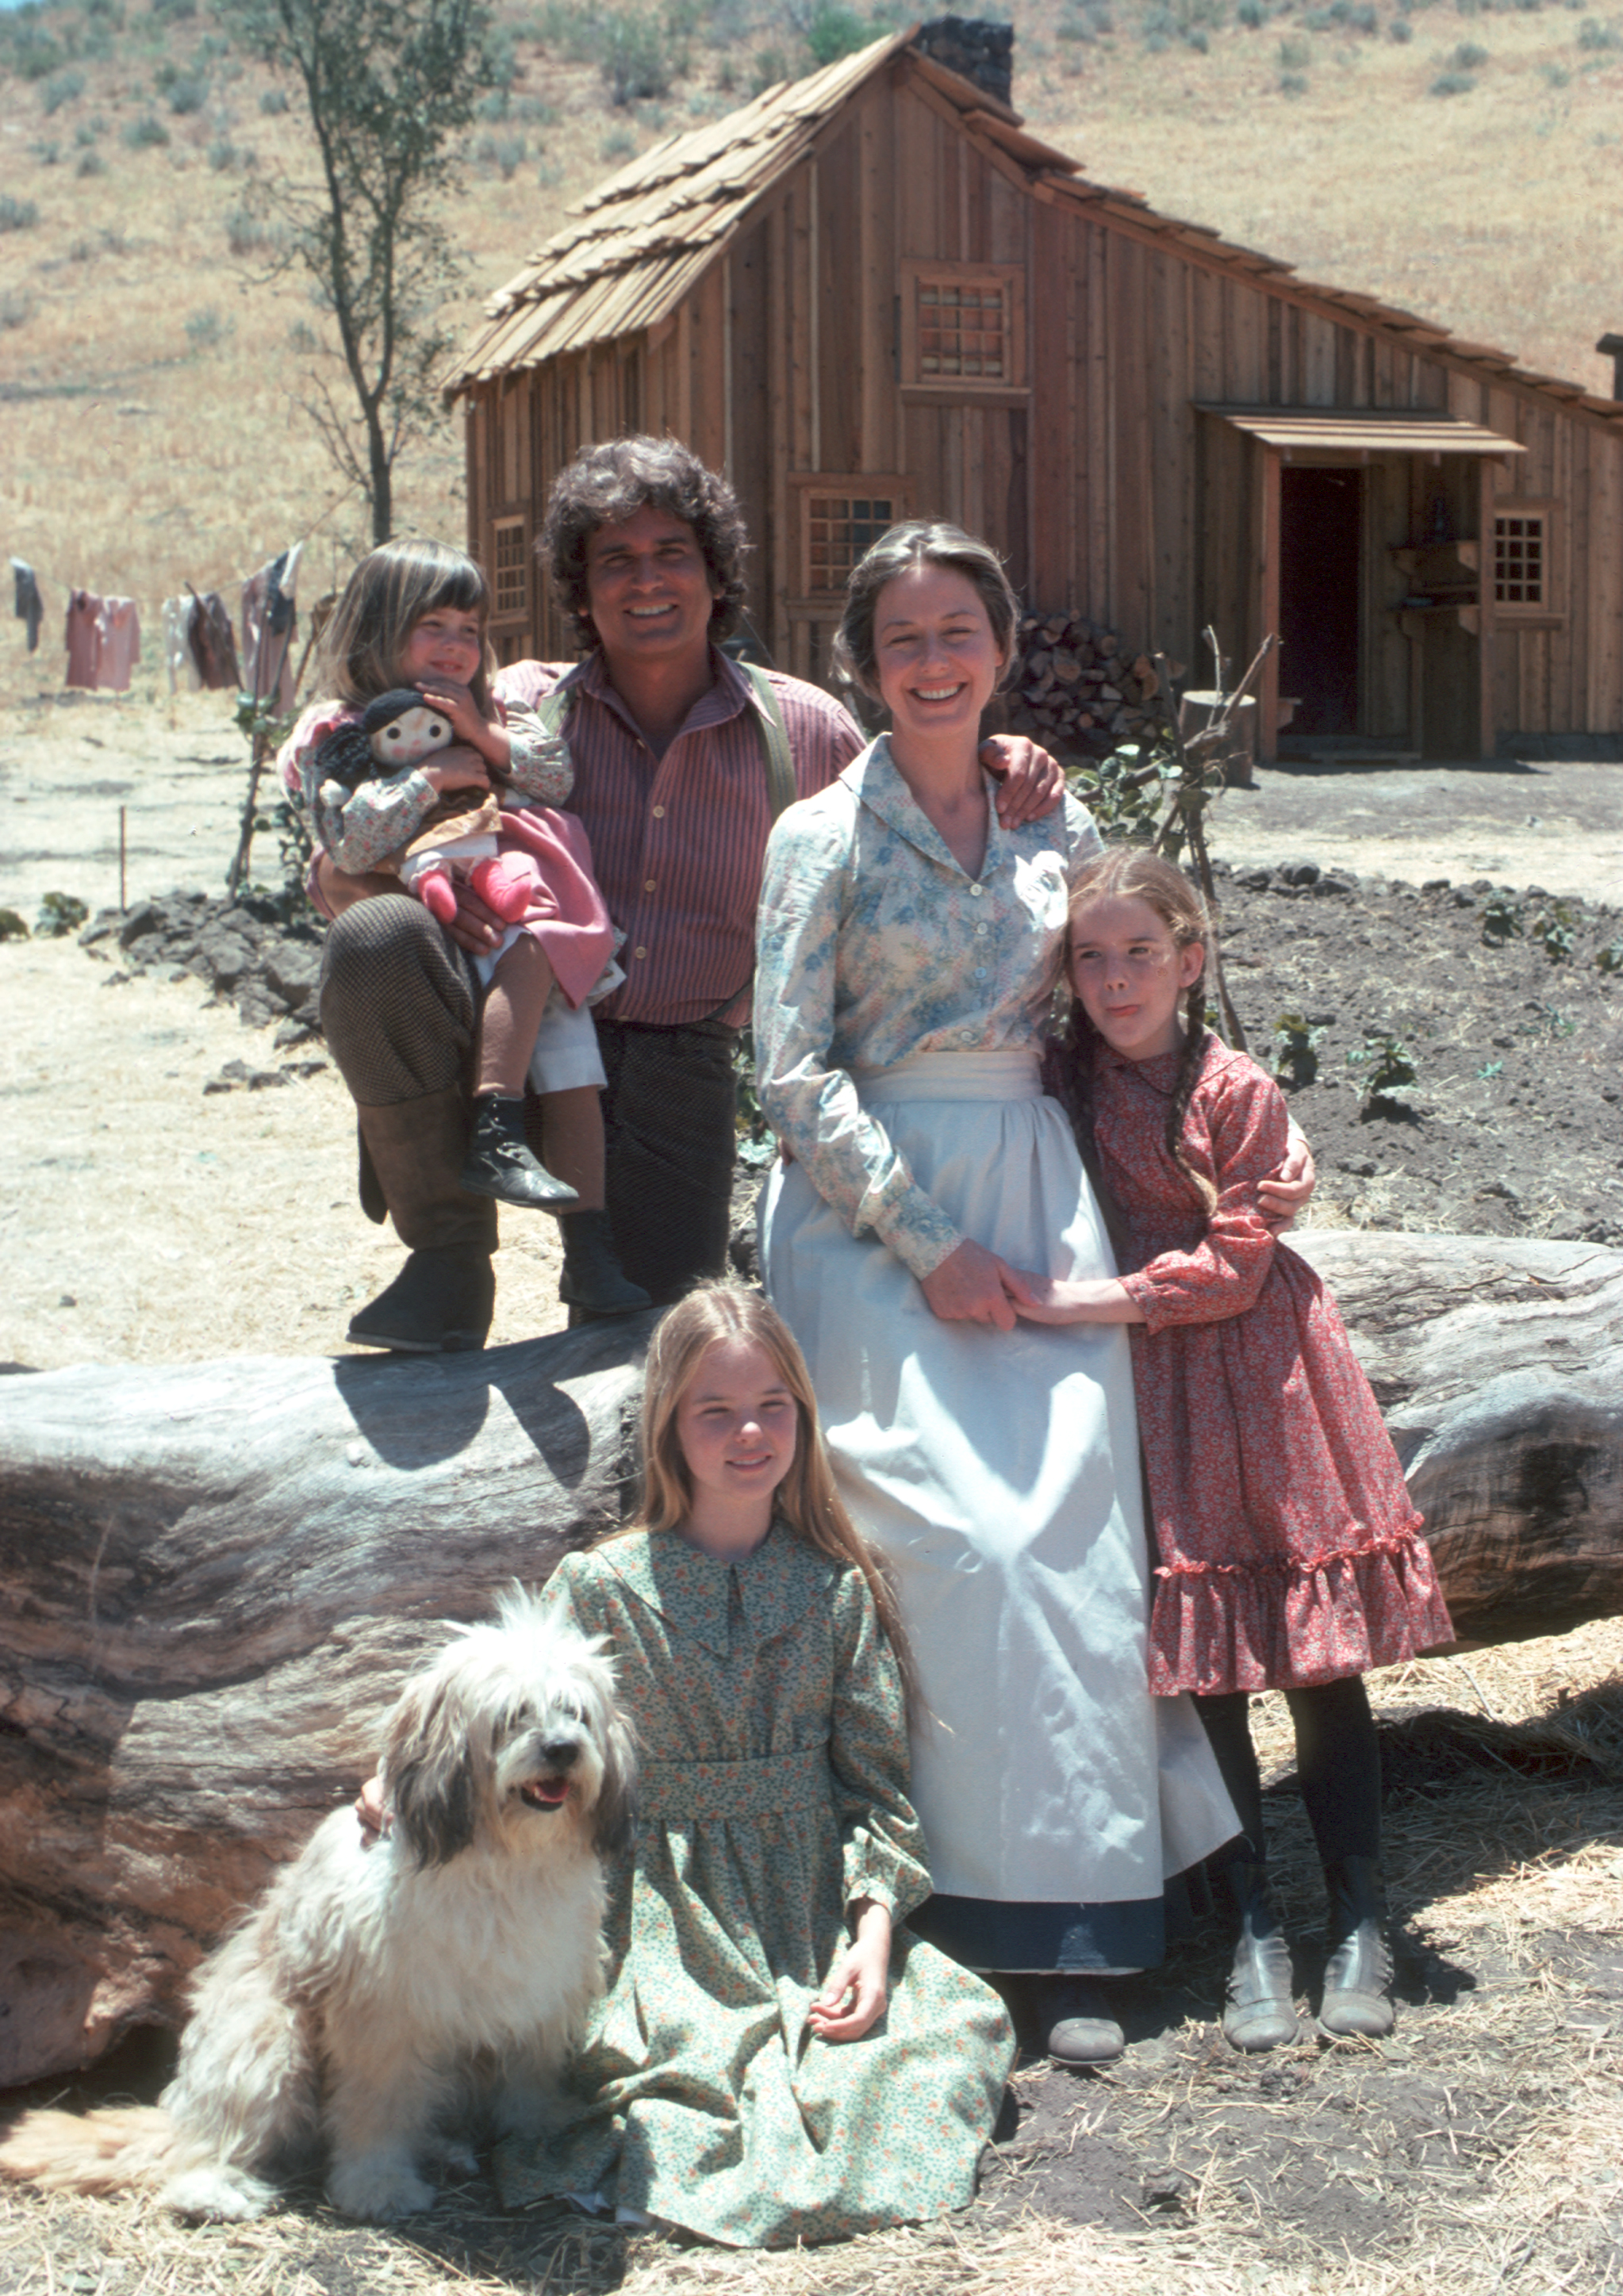 Photo of Little House on The Prairie taken in 1970 | Source: Getty Images